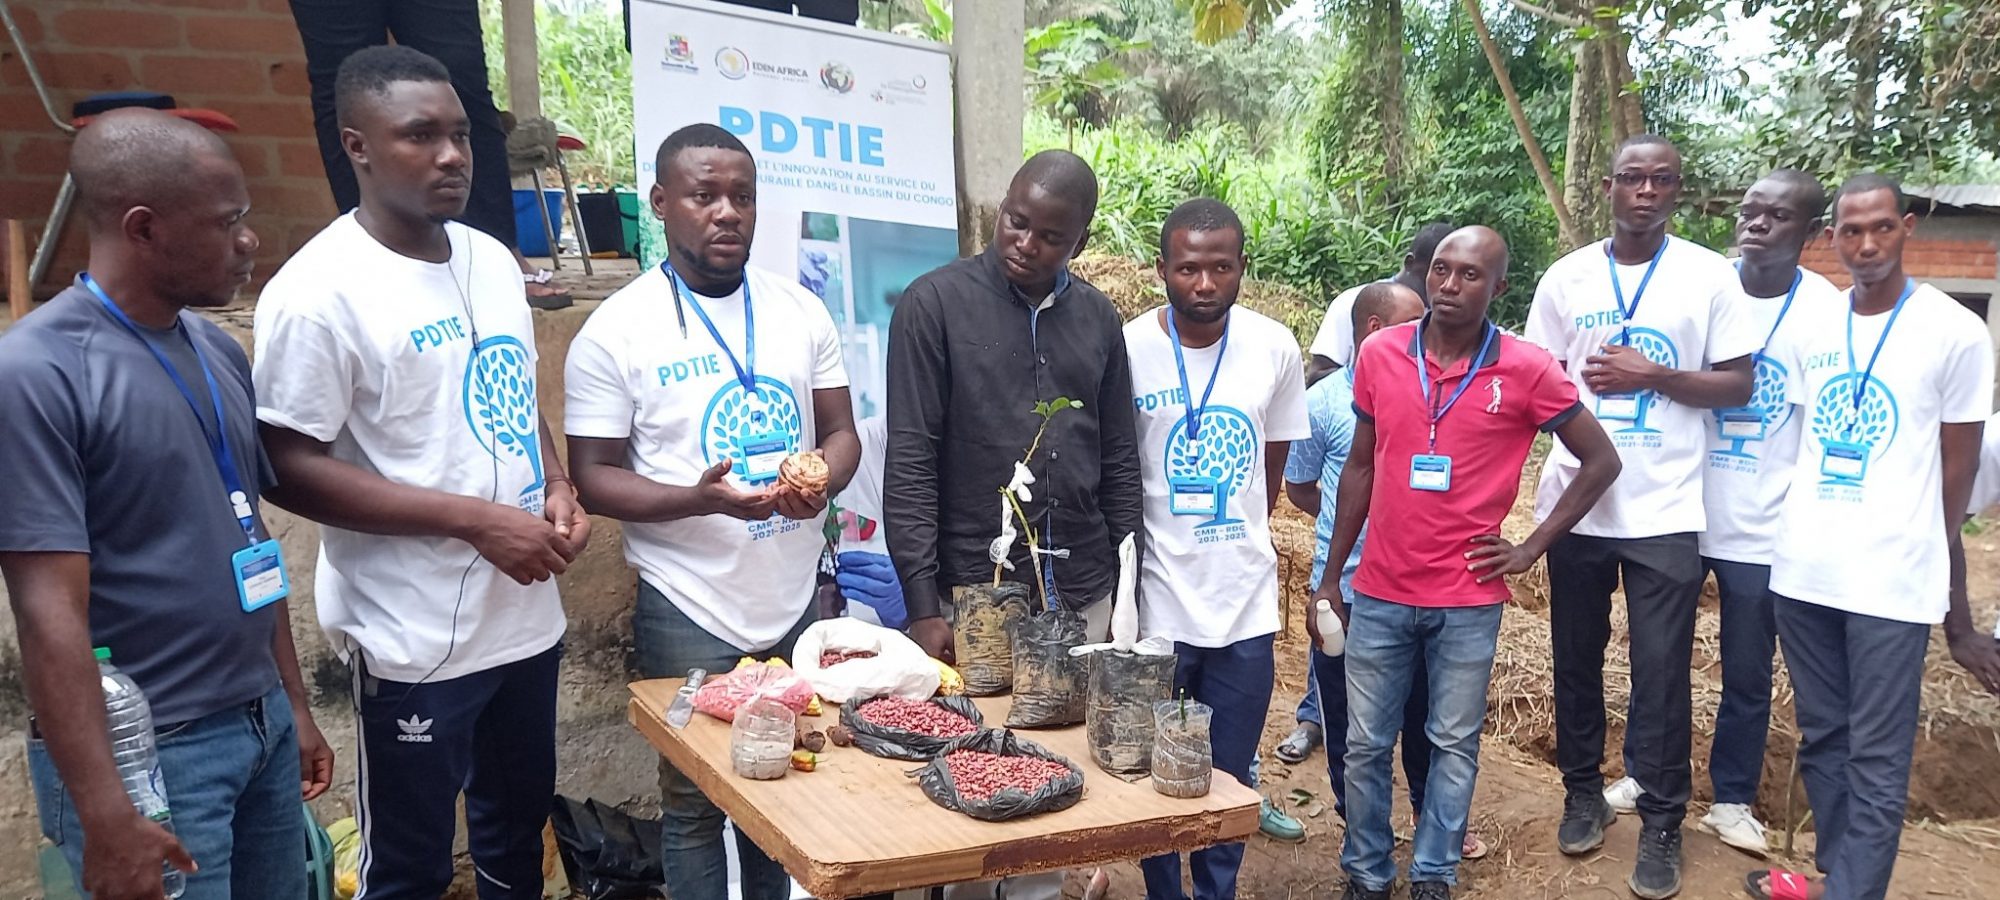 PDTIE – More than 200 young people from the Congo Basin participate in practical and ecological training